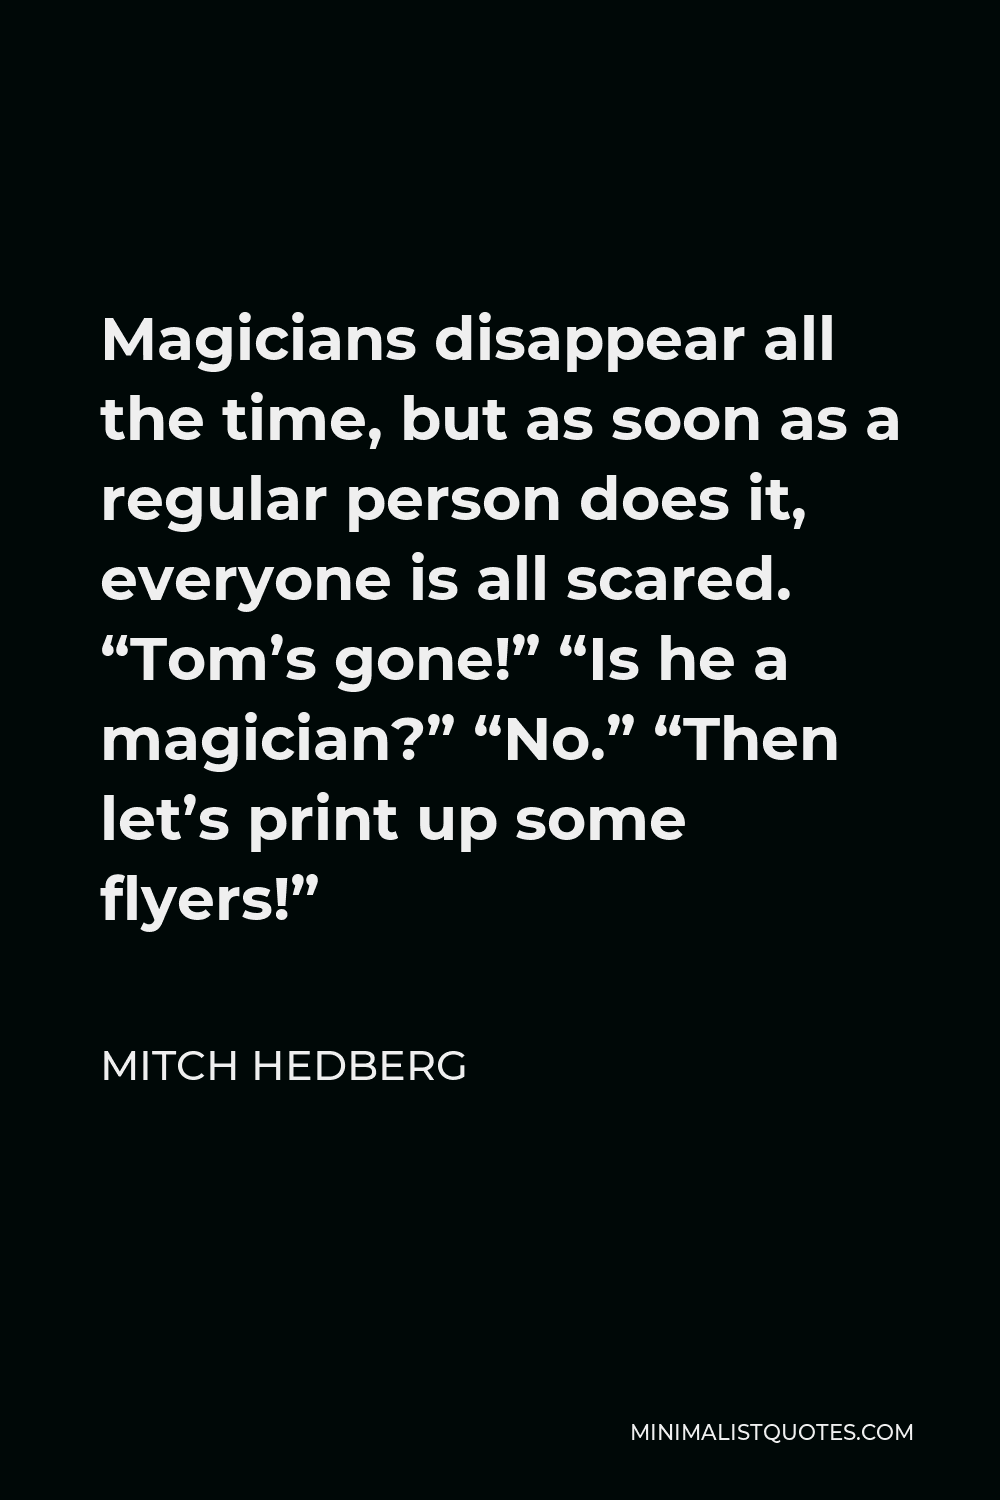 Mitch Hedberg Quote - Magicians disappear all the time, but as soon as a regular person does it, everyone is all scared. “Tom’s gone!” “Is he a magician?” “No.” “Then let’s print up some flyers!”